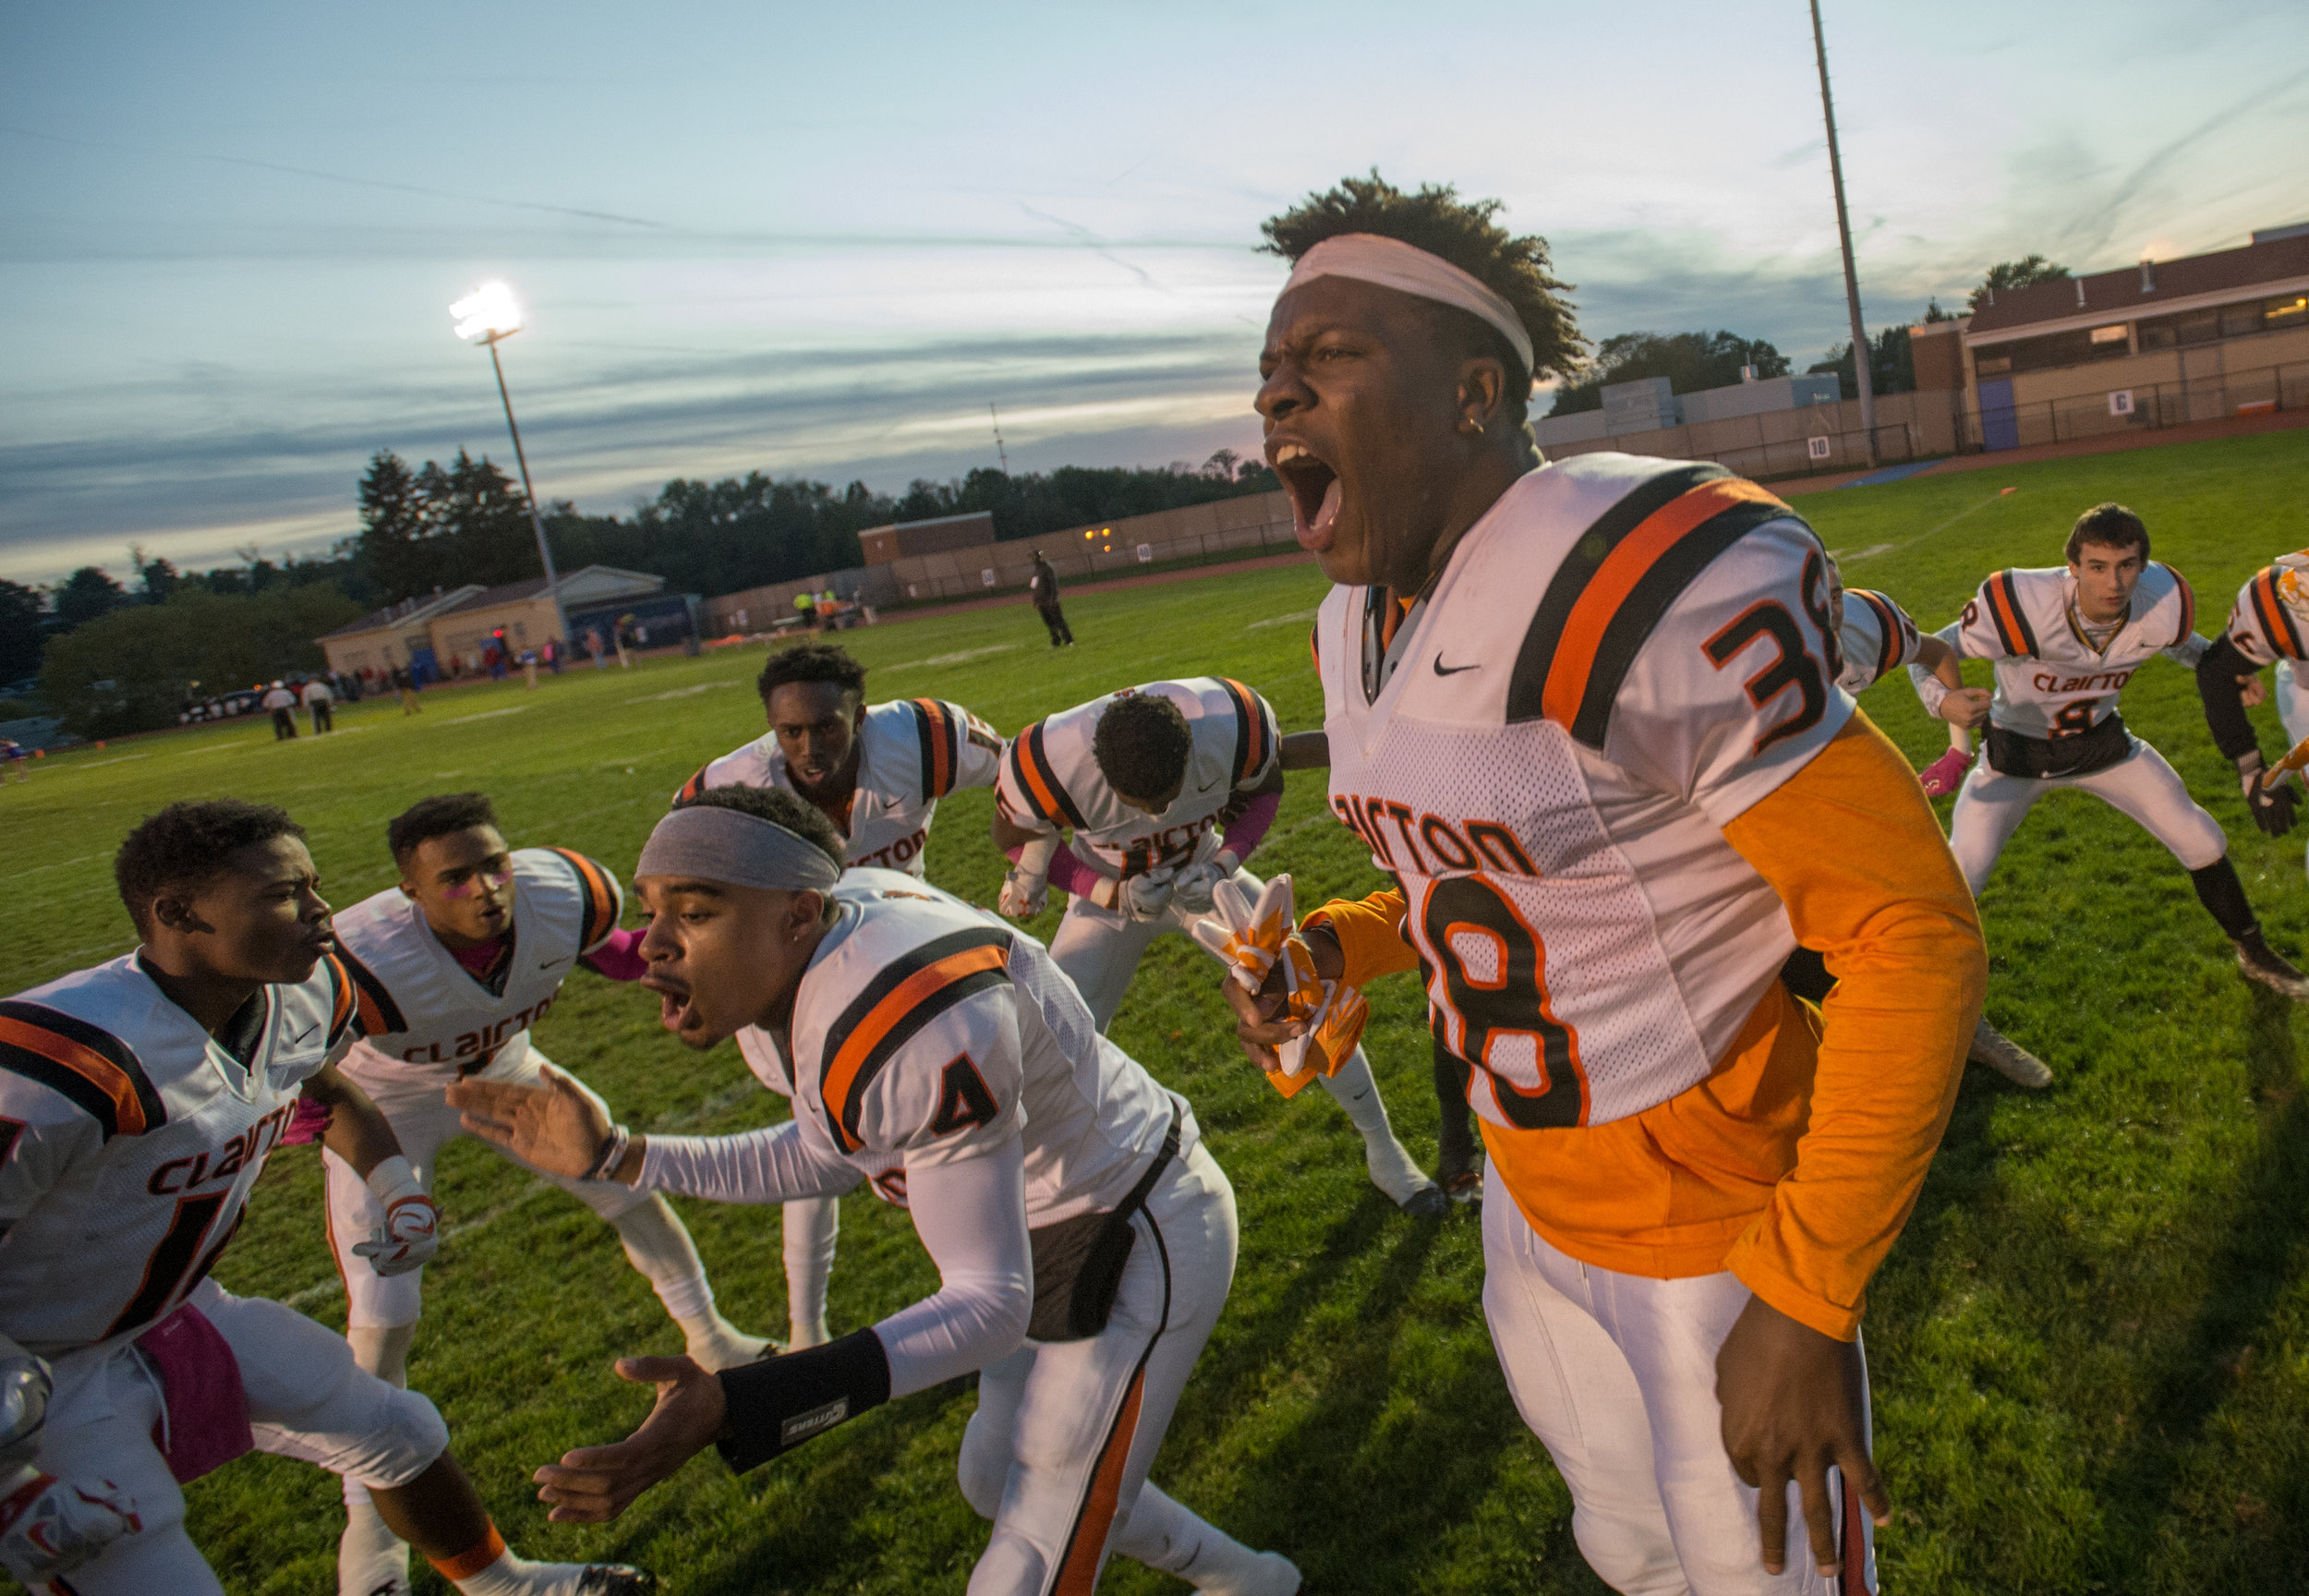  Clairton’s Lamont Wade and Clairton’s Noah Hamlin amp up their team before playing Jeannette on Friday, Oct. 28, 2016 at Jeannette's McKee Stadium. Clairton beat Jeannette 32-13. 